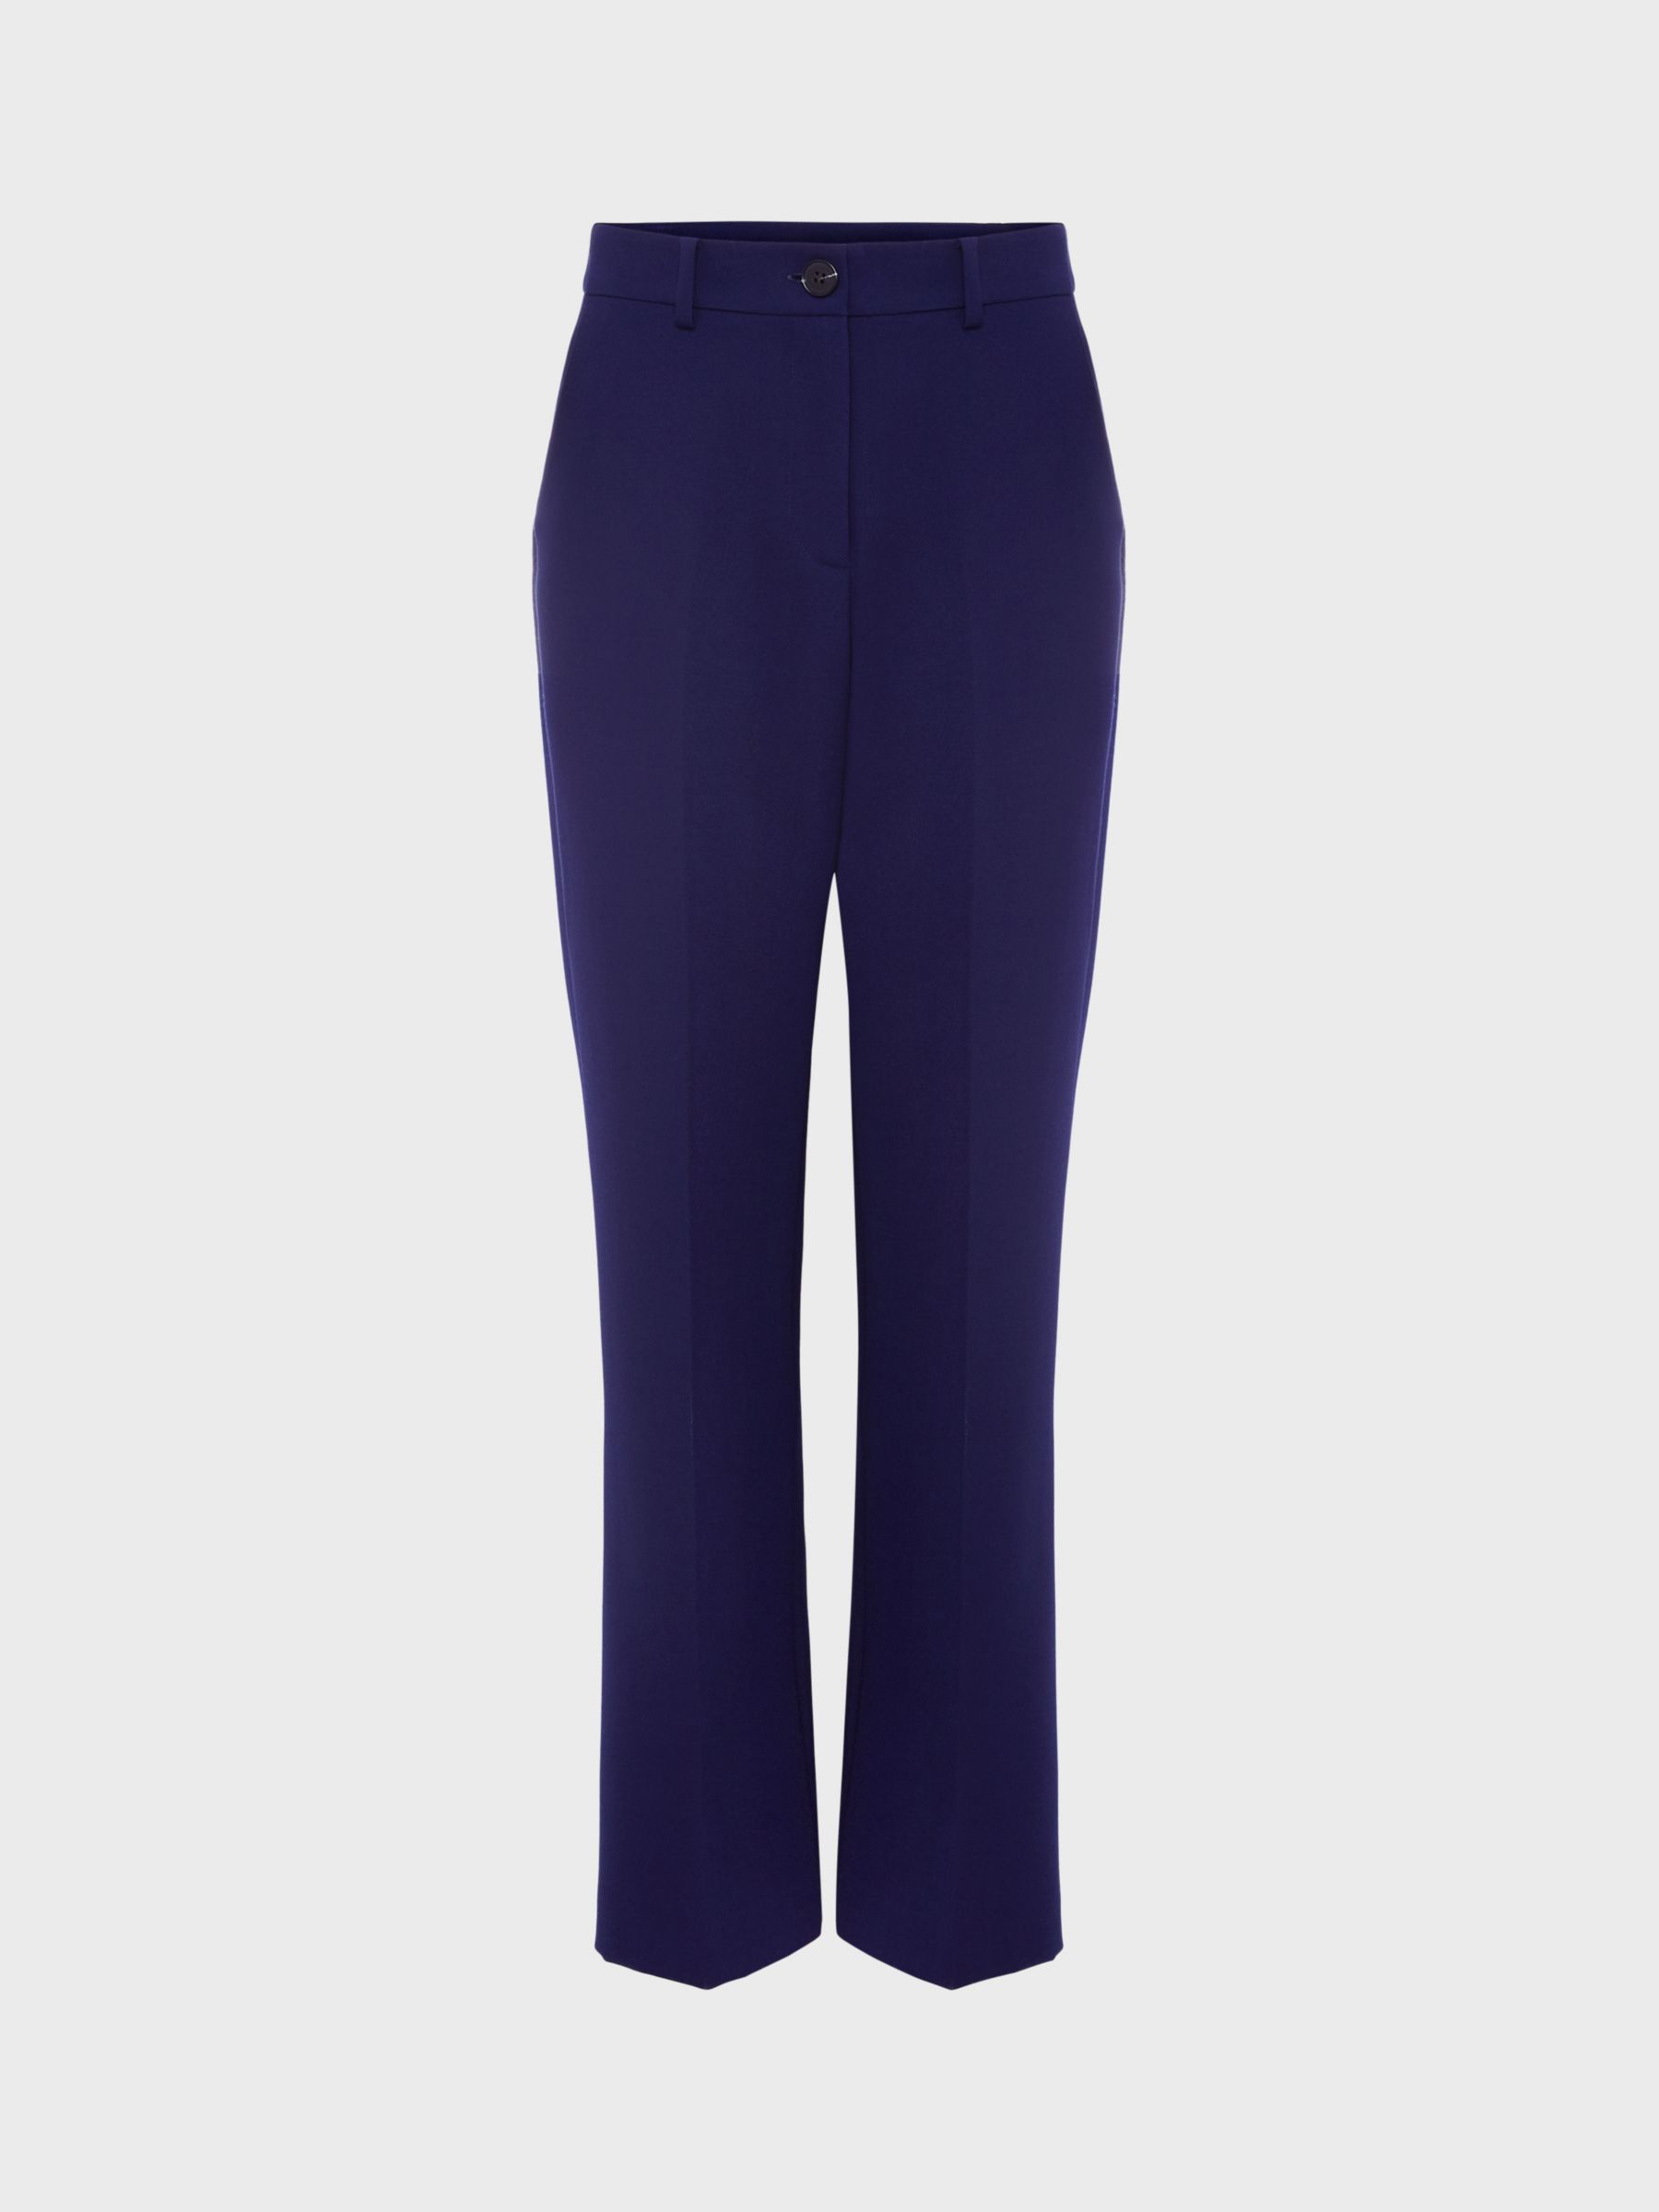 Hobbs Romy Straight Cut Ankle Grazer Trousers, Rich Navy Blue at